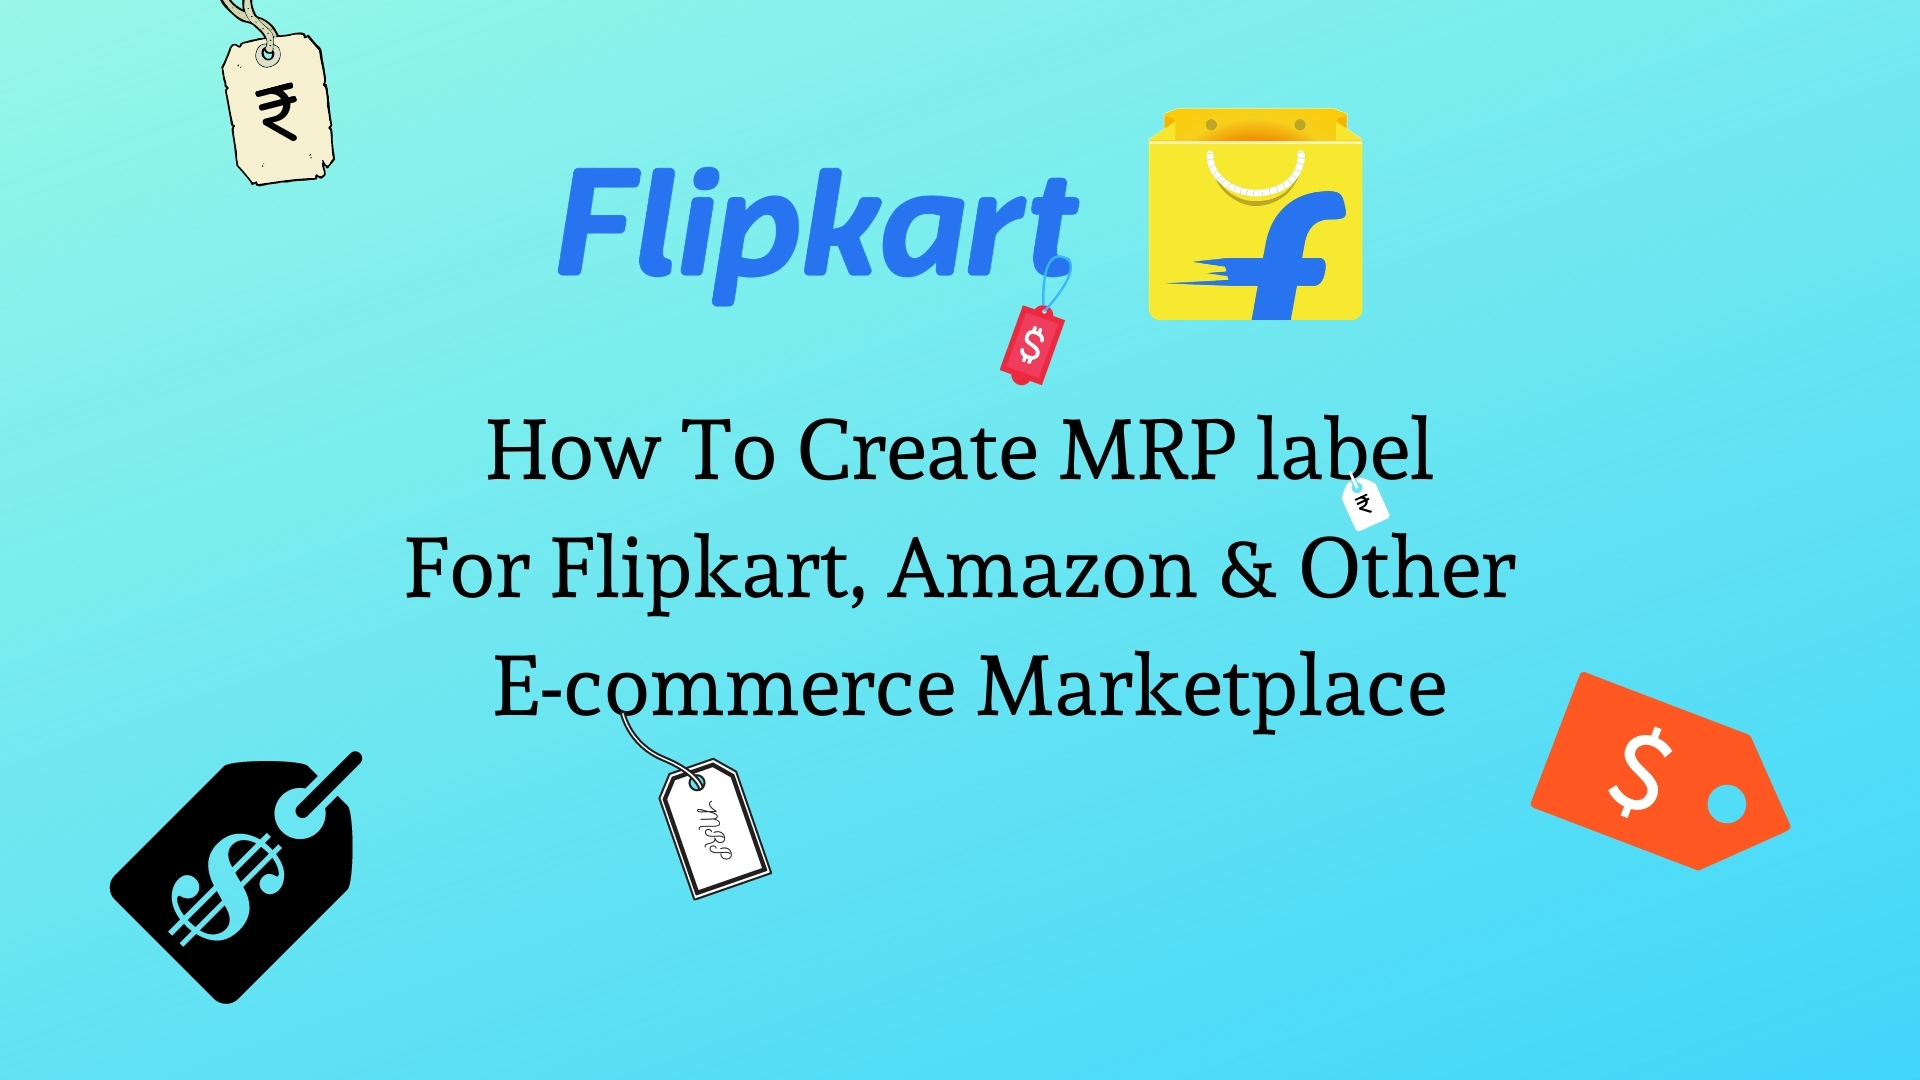 how to create mrp label, barcode label printer, how to create mrp label, how to create price tag labels, mrp label for flipkart, how to make label stickers, what is mrp label, how to print barcodes, how to make barcode, label printer for small business, create stickers, mrp tag, label printing, how to create price tag, MRP Labels for eCommerce Sellers